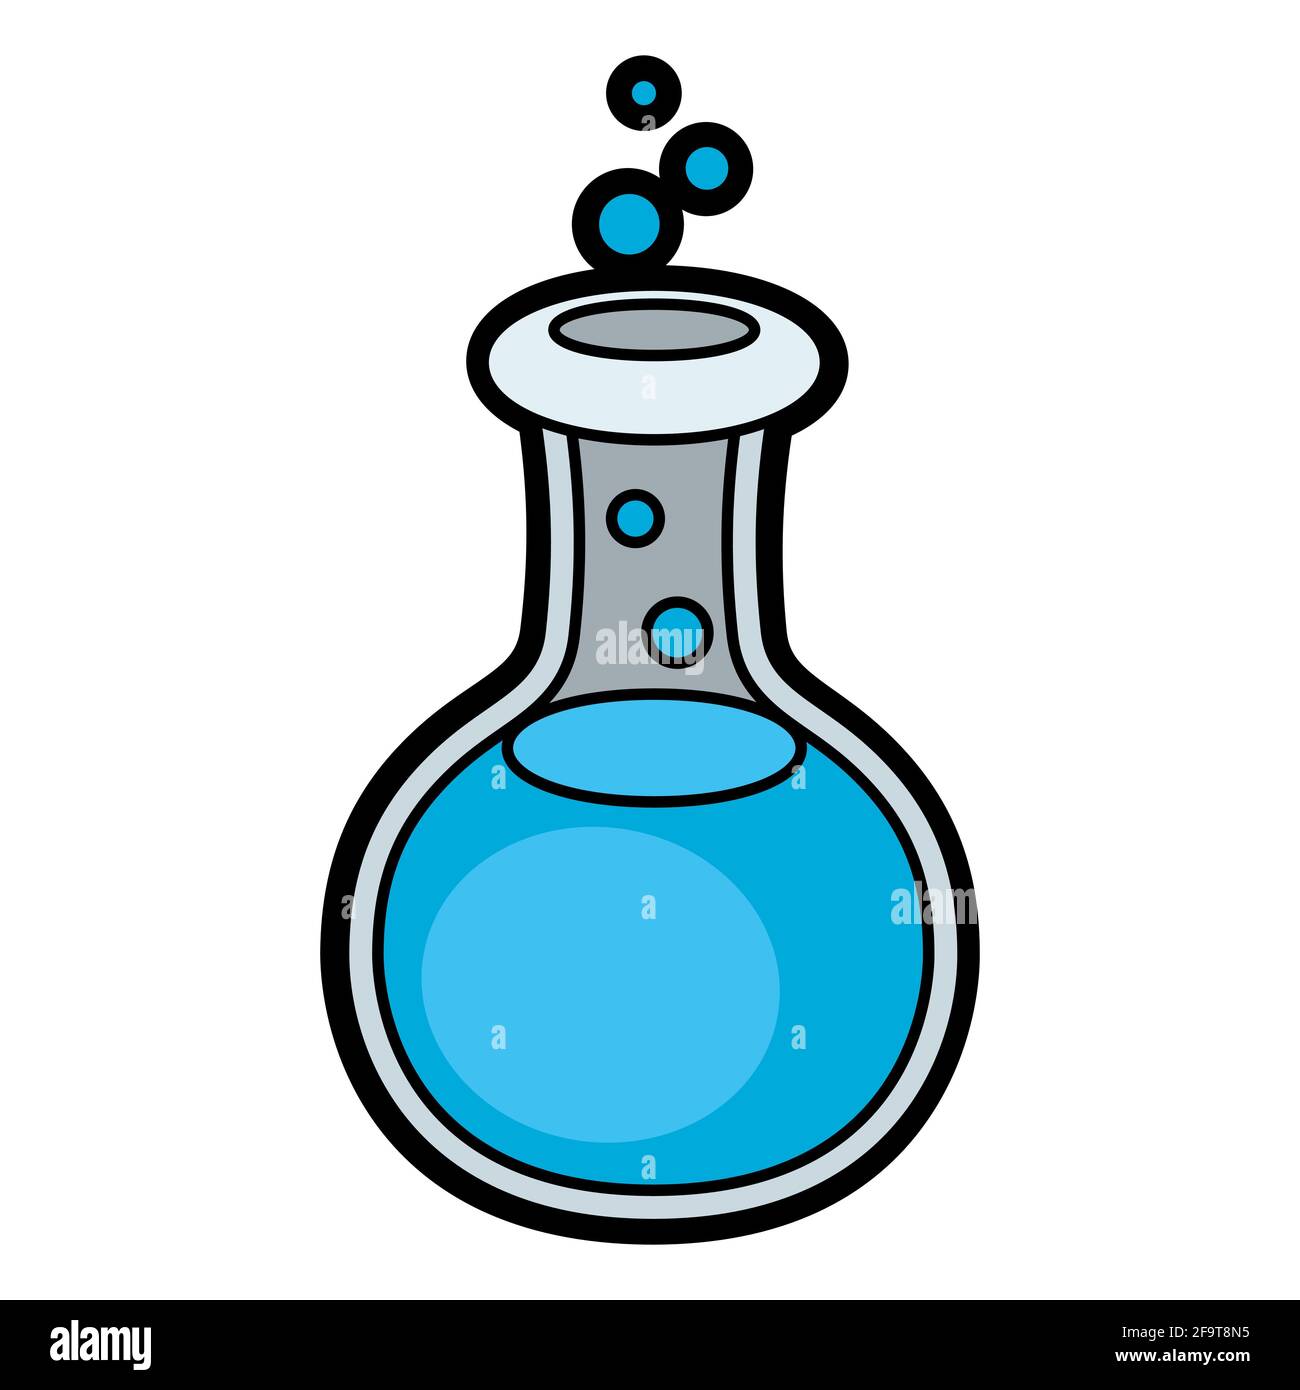 Illustration of test tube. School education icon for industry and business. Stock Vector